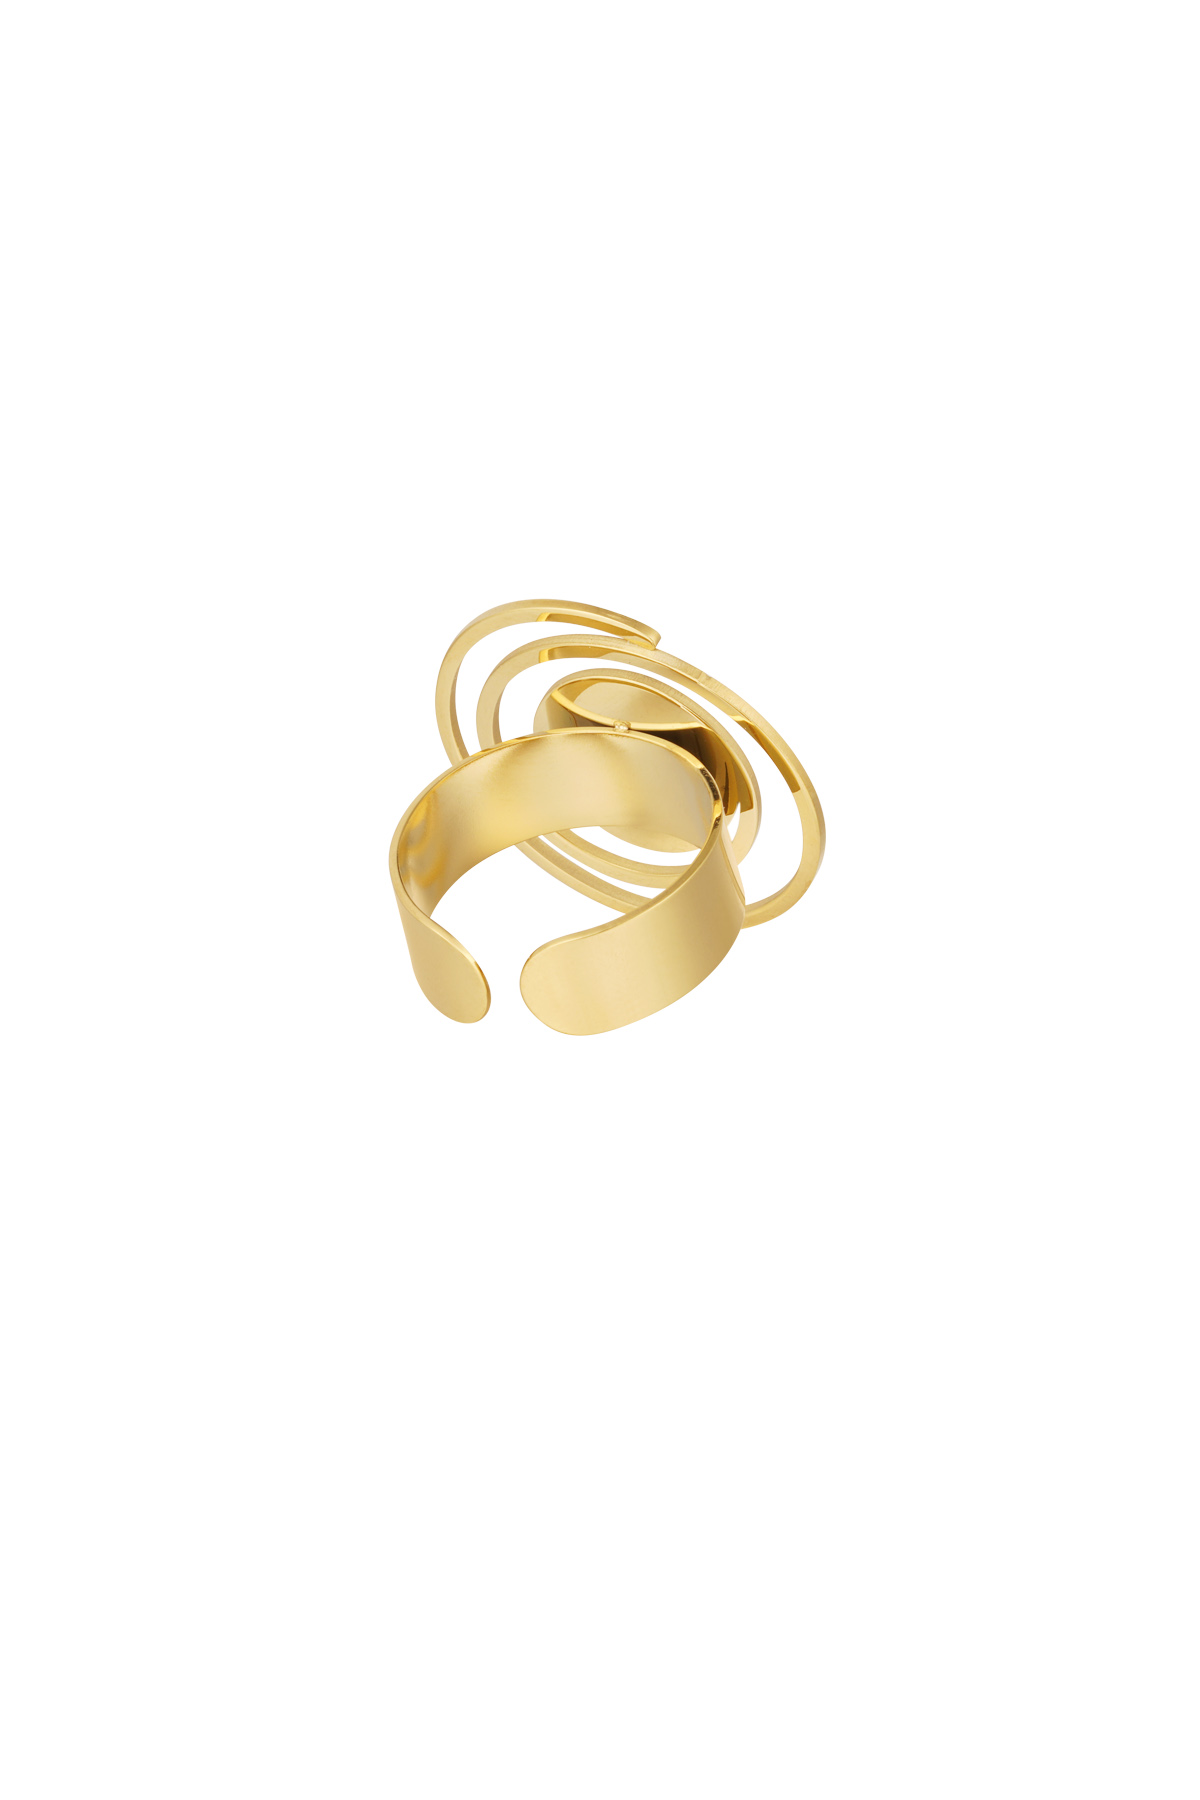 Ring with turn - gold Picture4